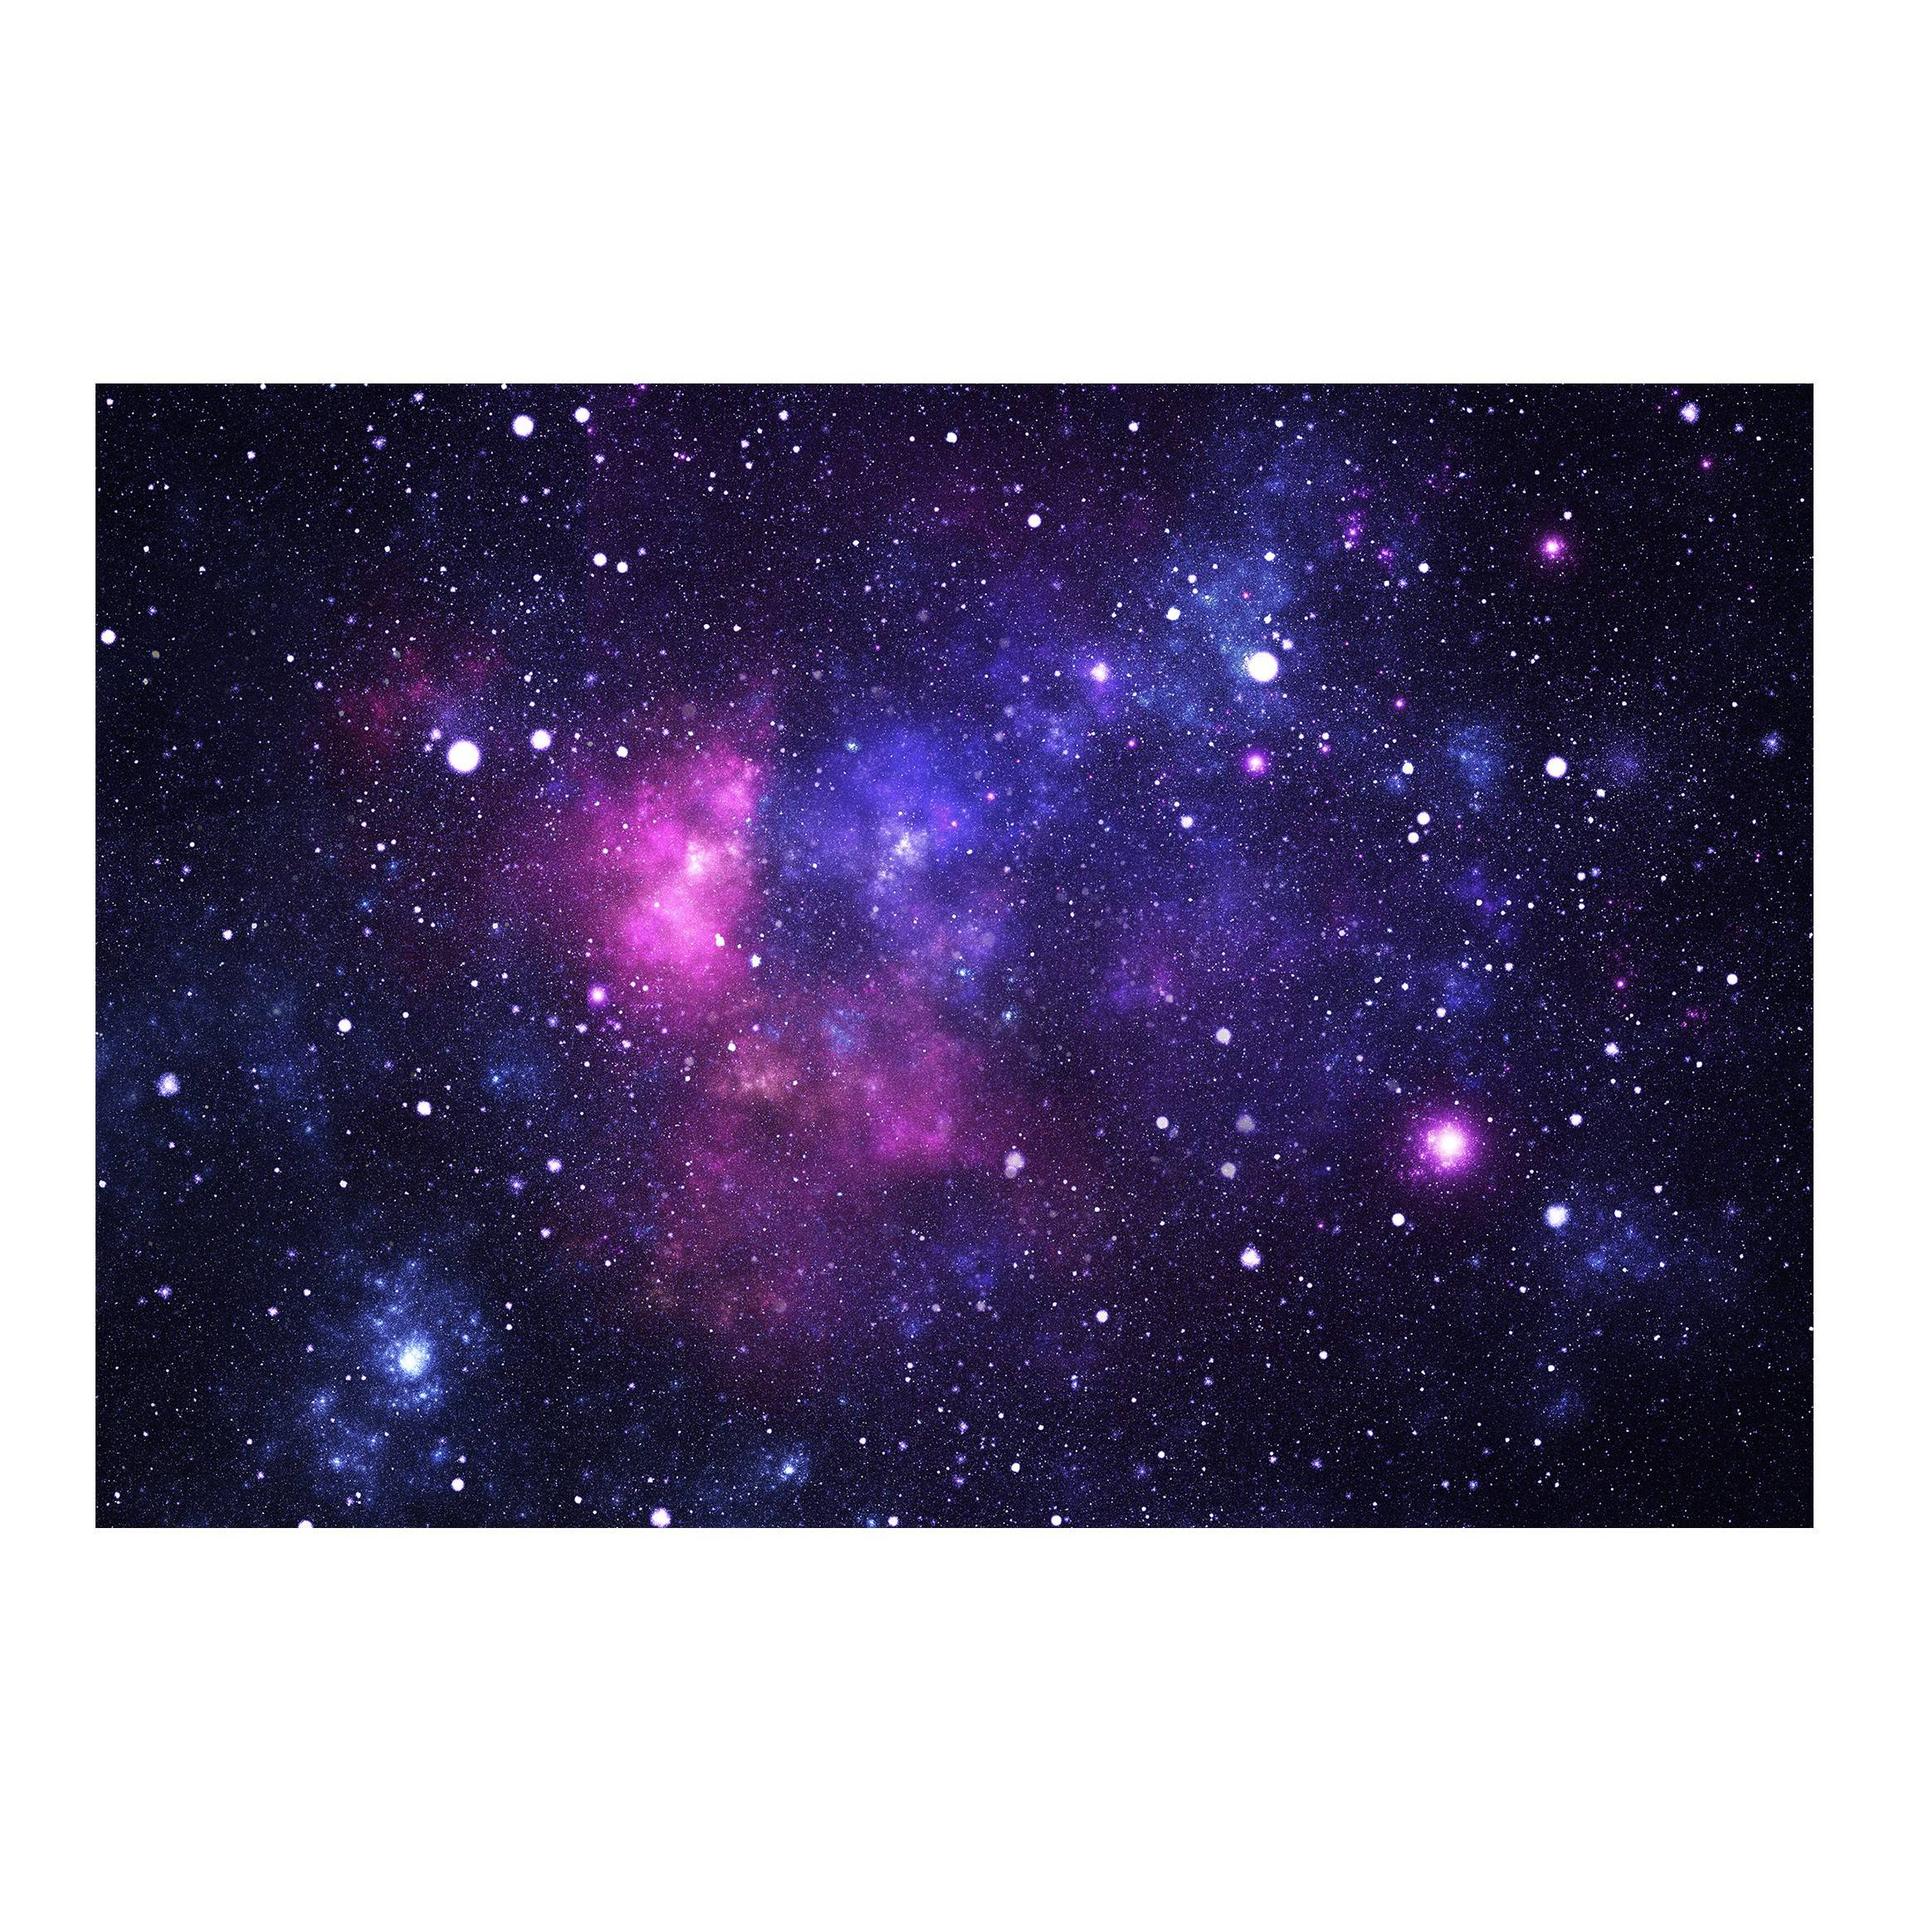 galaxy - Is this an actual nebula or CGI? - Astronomy Stack Exchange